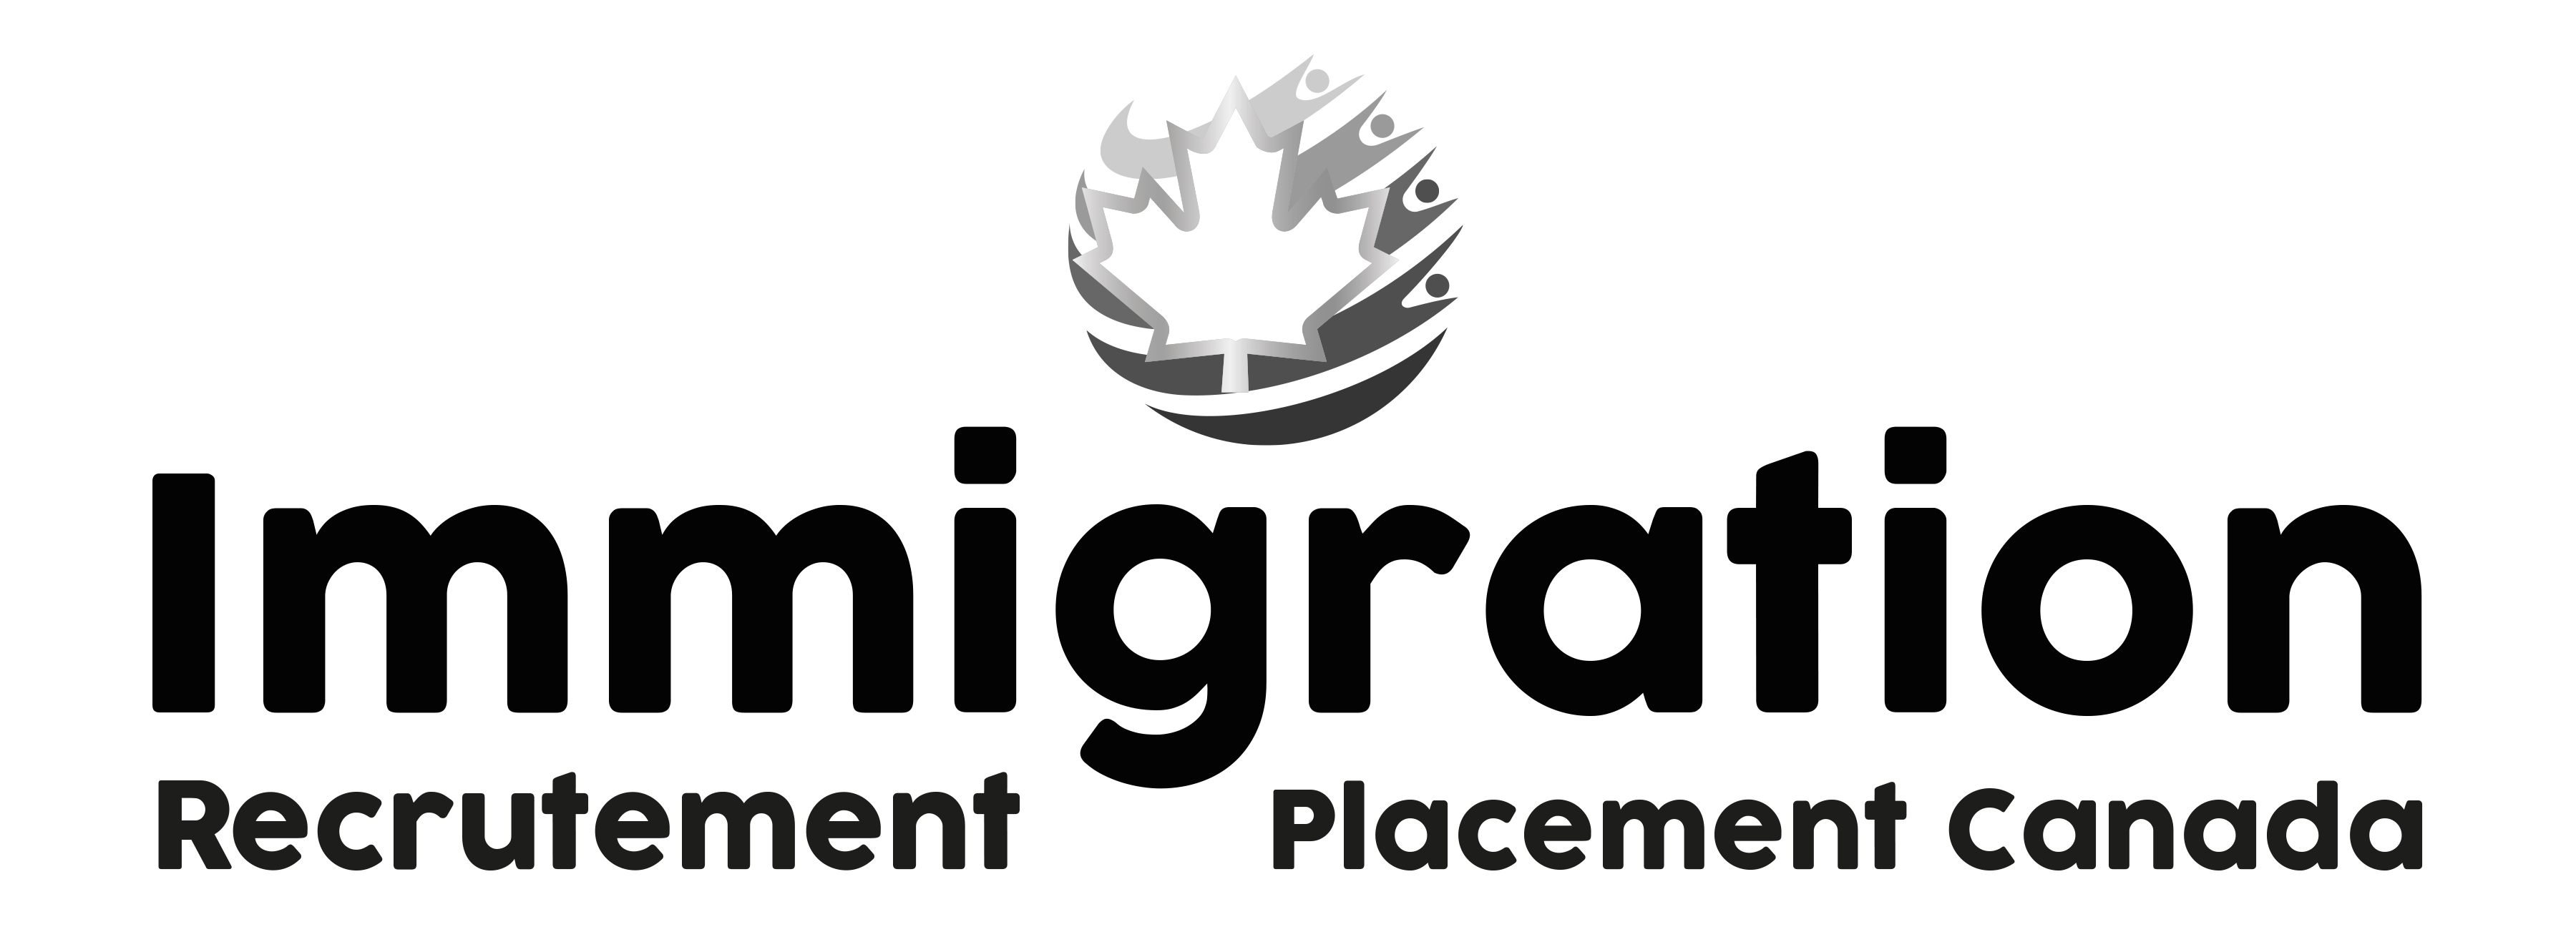 our-services-immigration-recrutement-placement-canada-inc